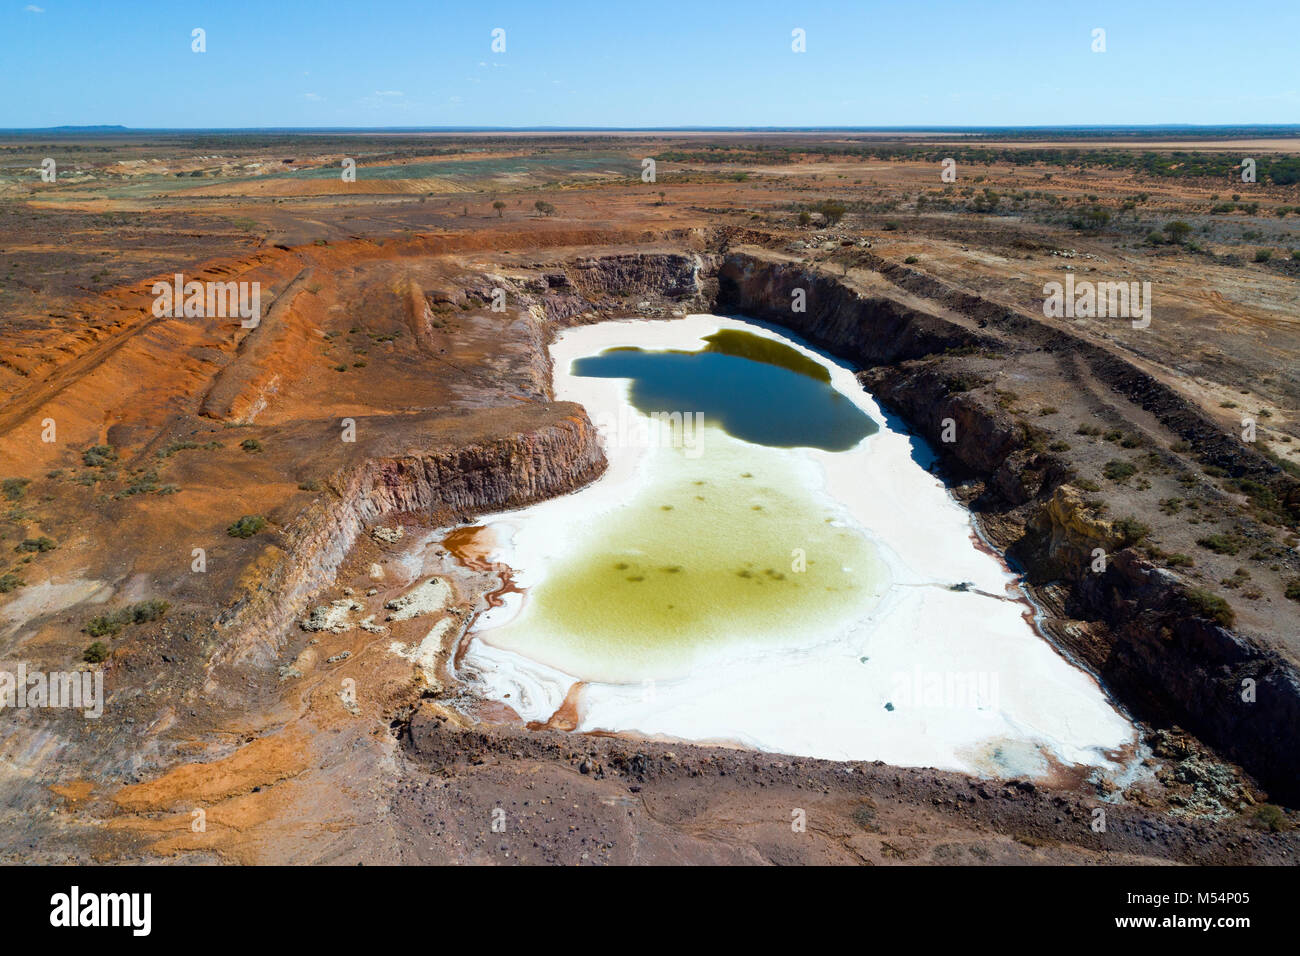 Aerial view of abandoned open cut gold mine that has filled with water turning to salt,, Meekathara, Murchison, Western Australia Stock Photo